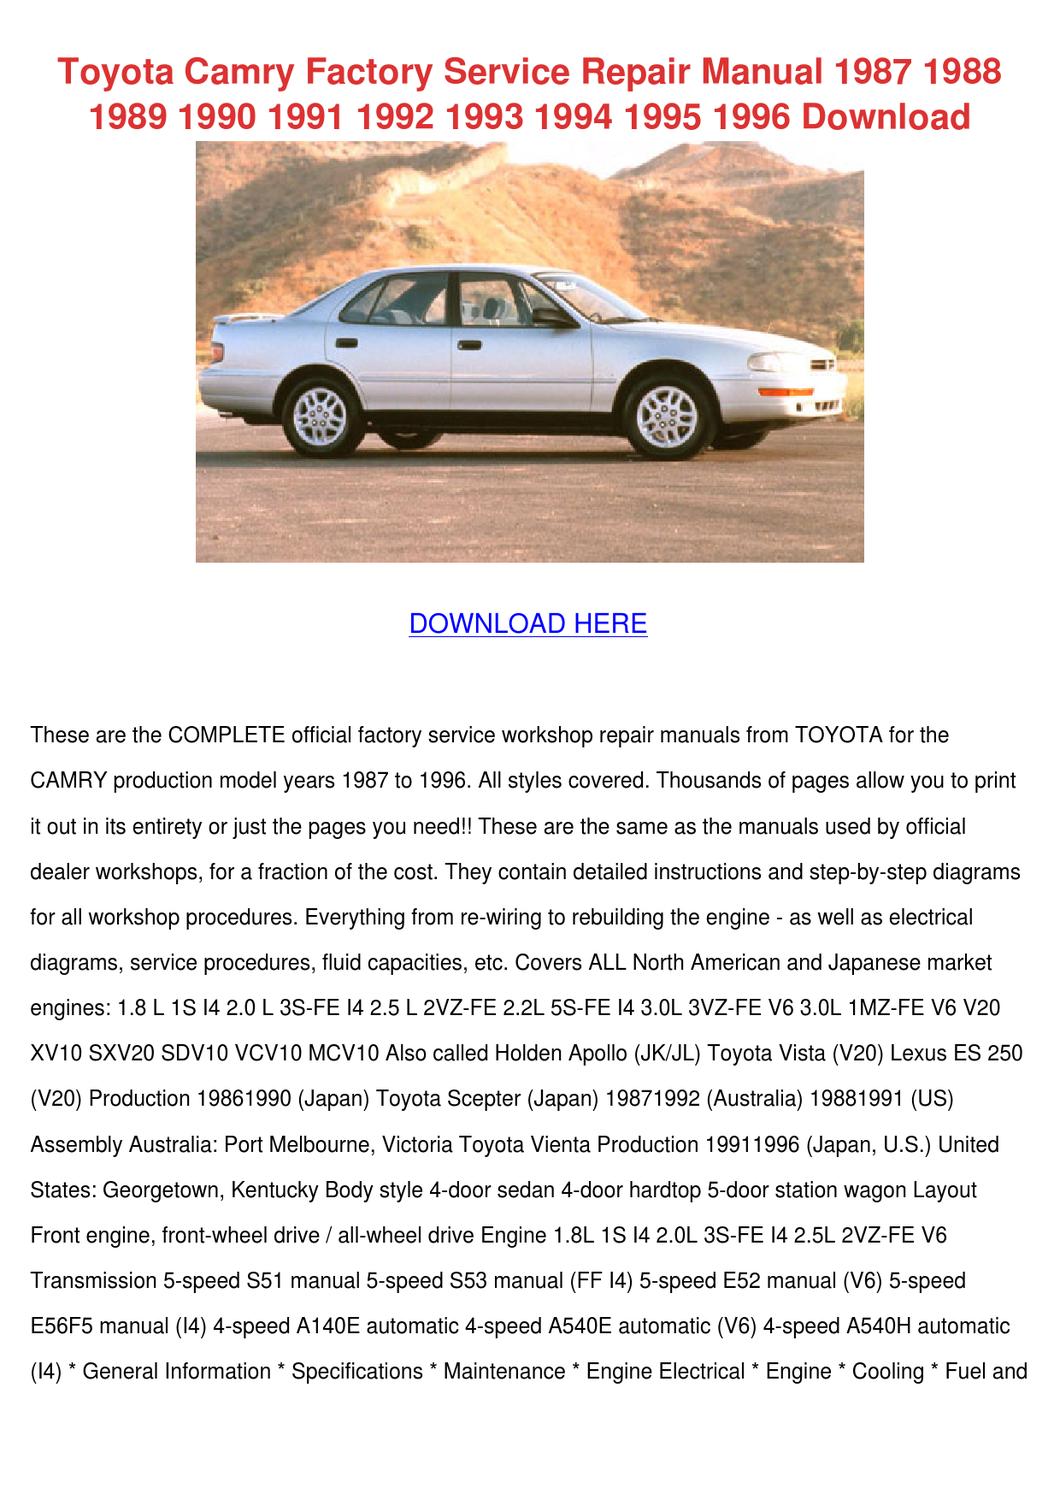 2005 Toyota Camry Owners Manual Download - heavycan